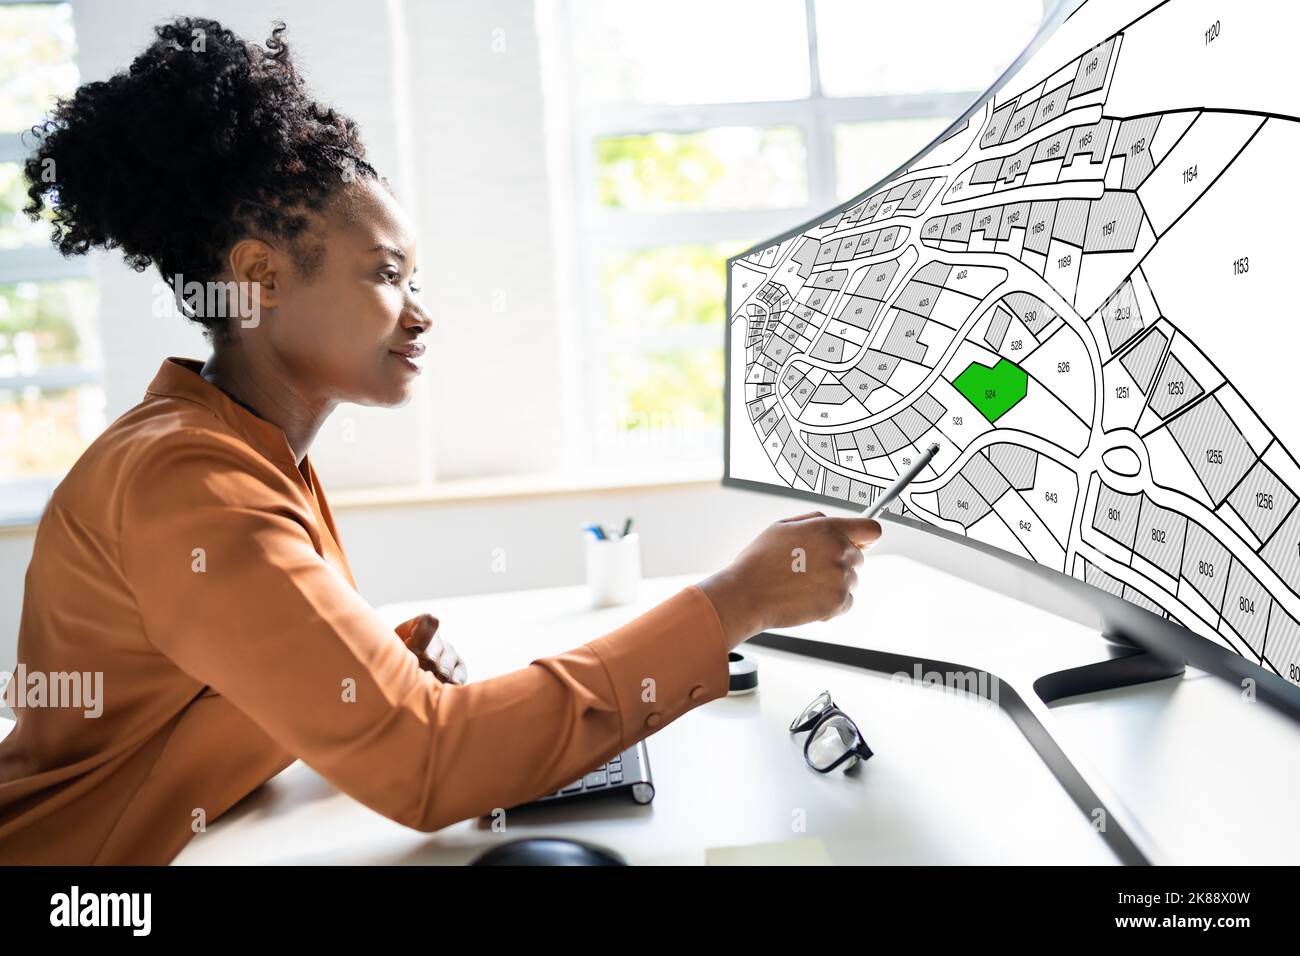 African American Using Cadastral Map On Desktop Computer Stock Photo